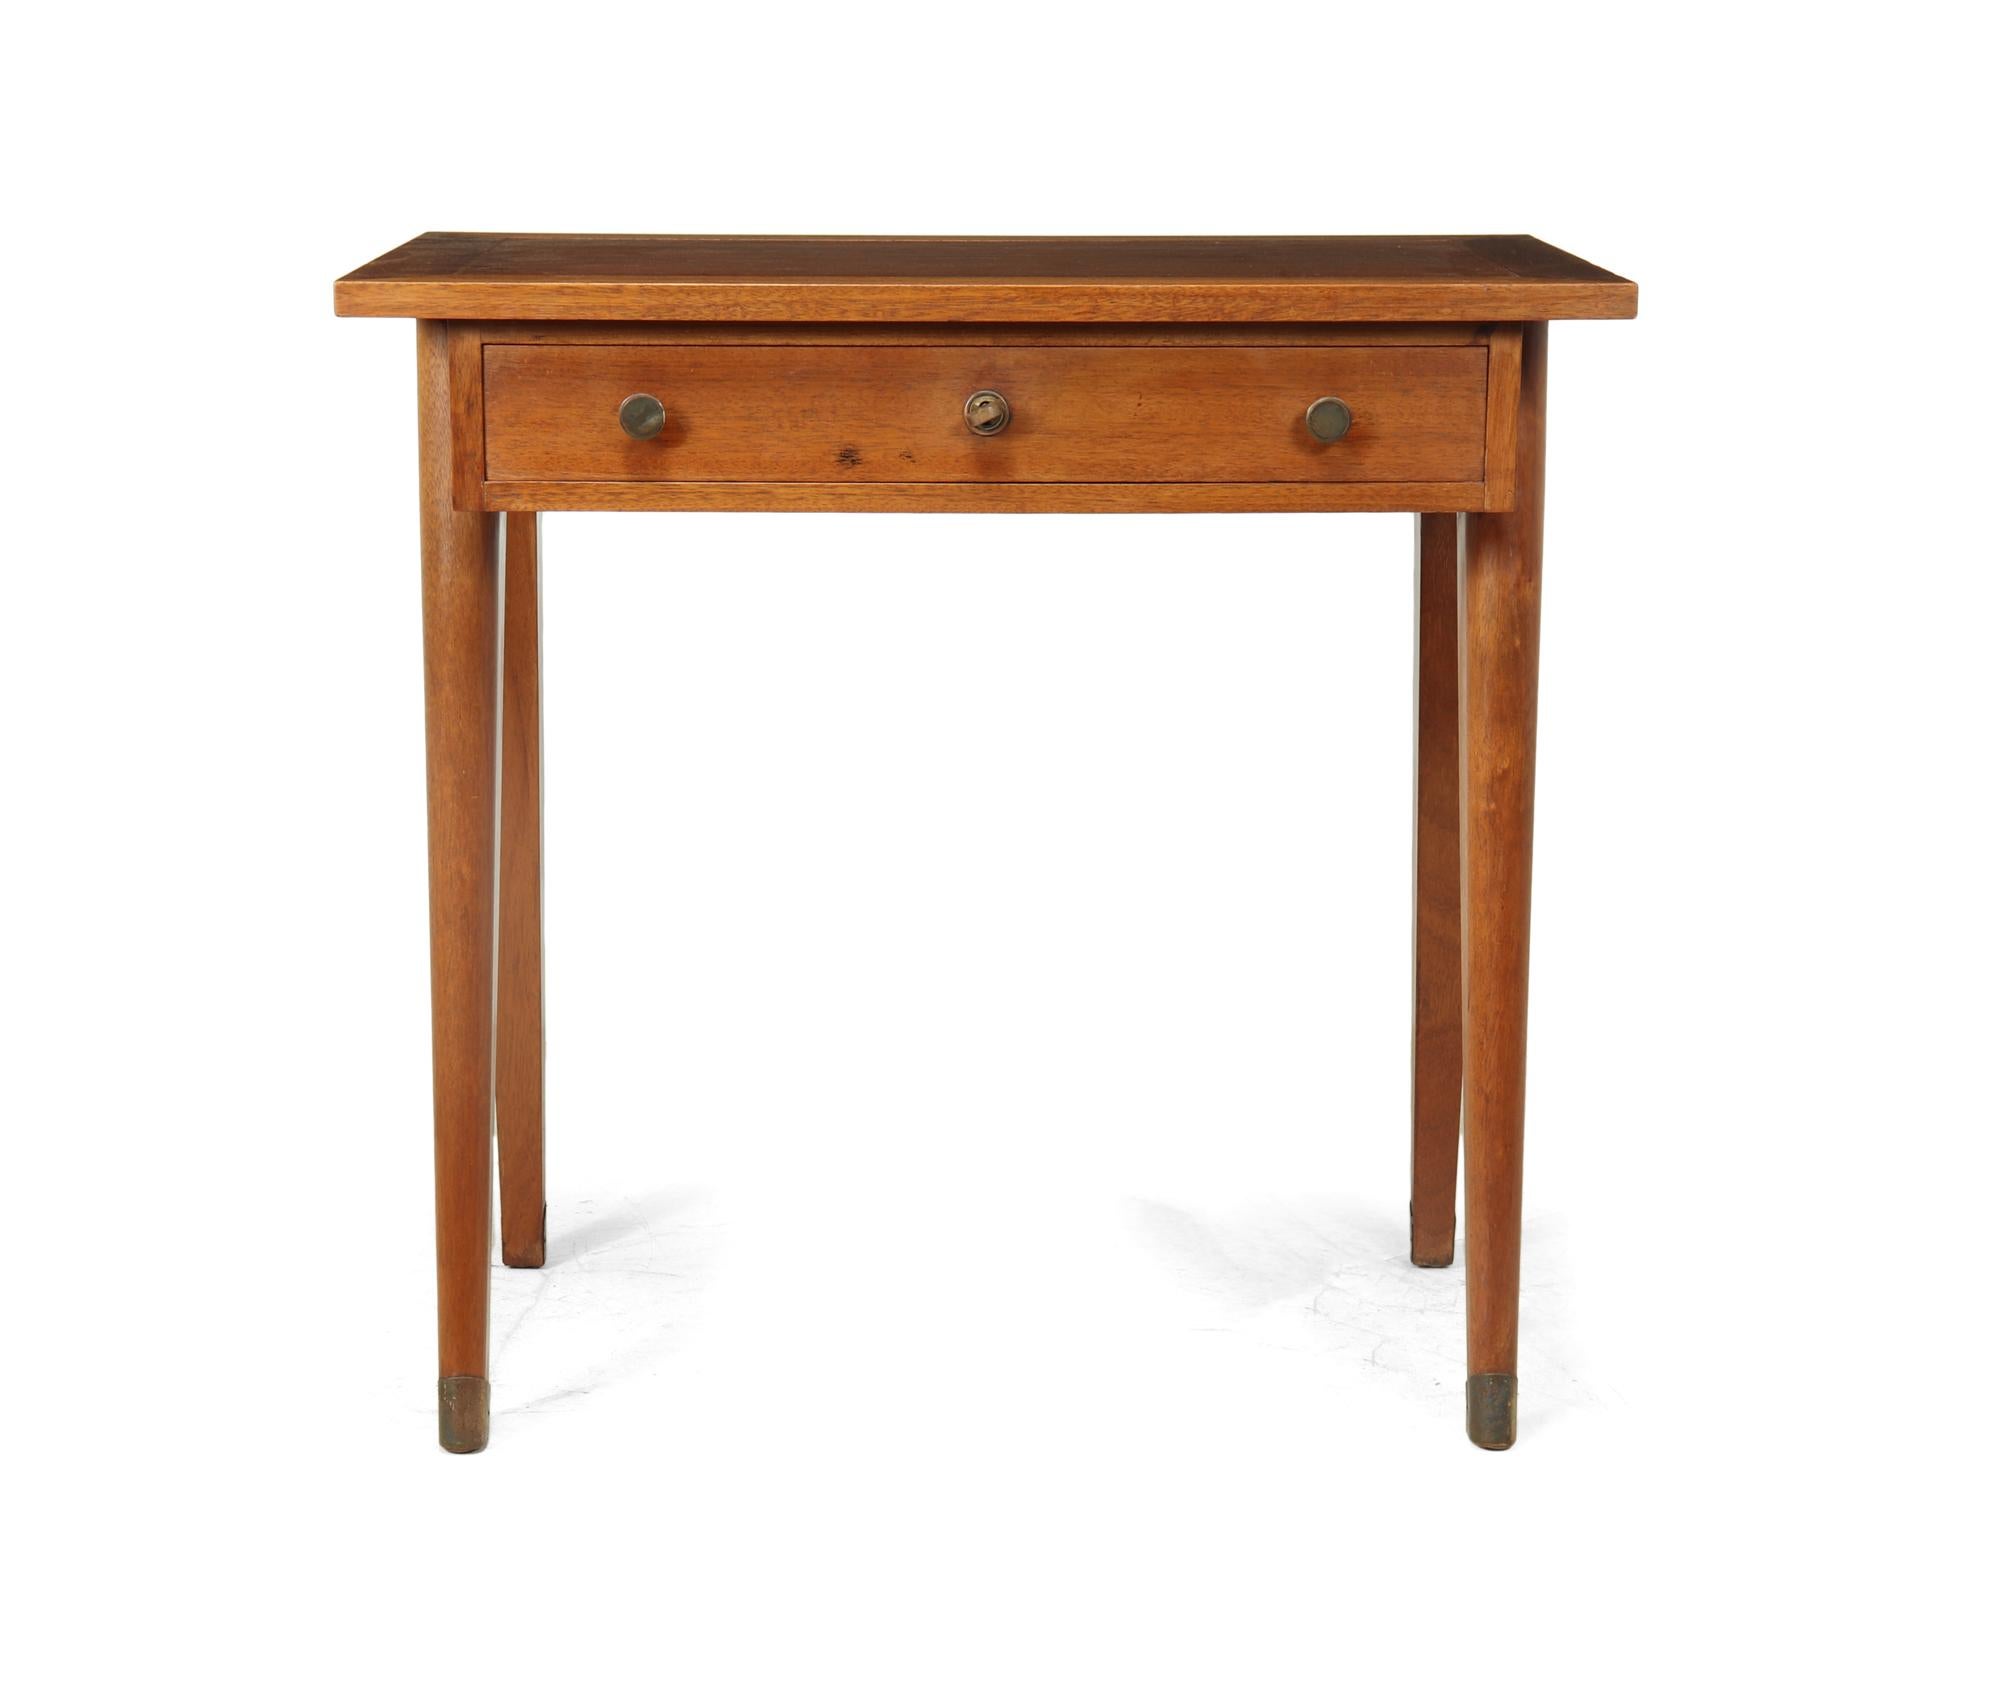 A modernist design desk in solid oak and mahogany four legs with brass sabots, single lockable drawer and inset hyde leather top the desk is in excellent original condition benefitting from a wax polish to retain patina.

Age: 1940

Style: